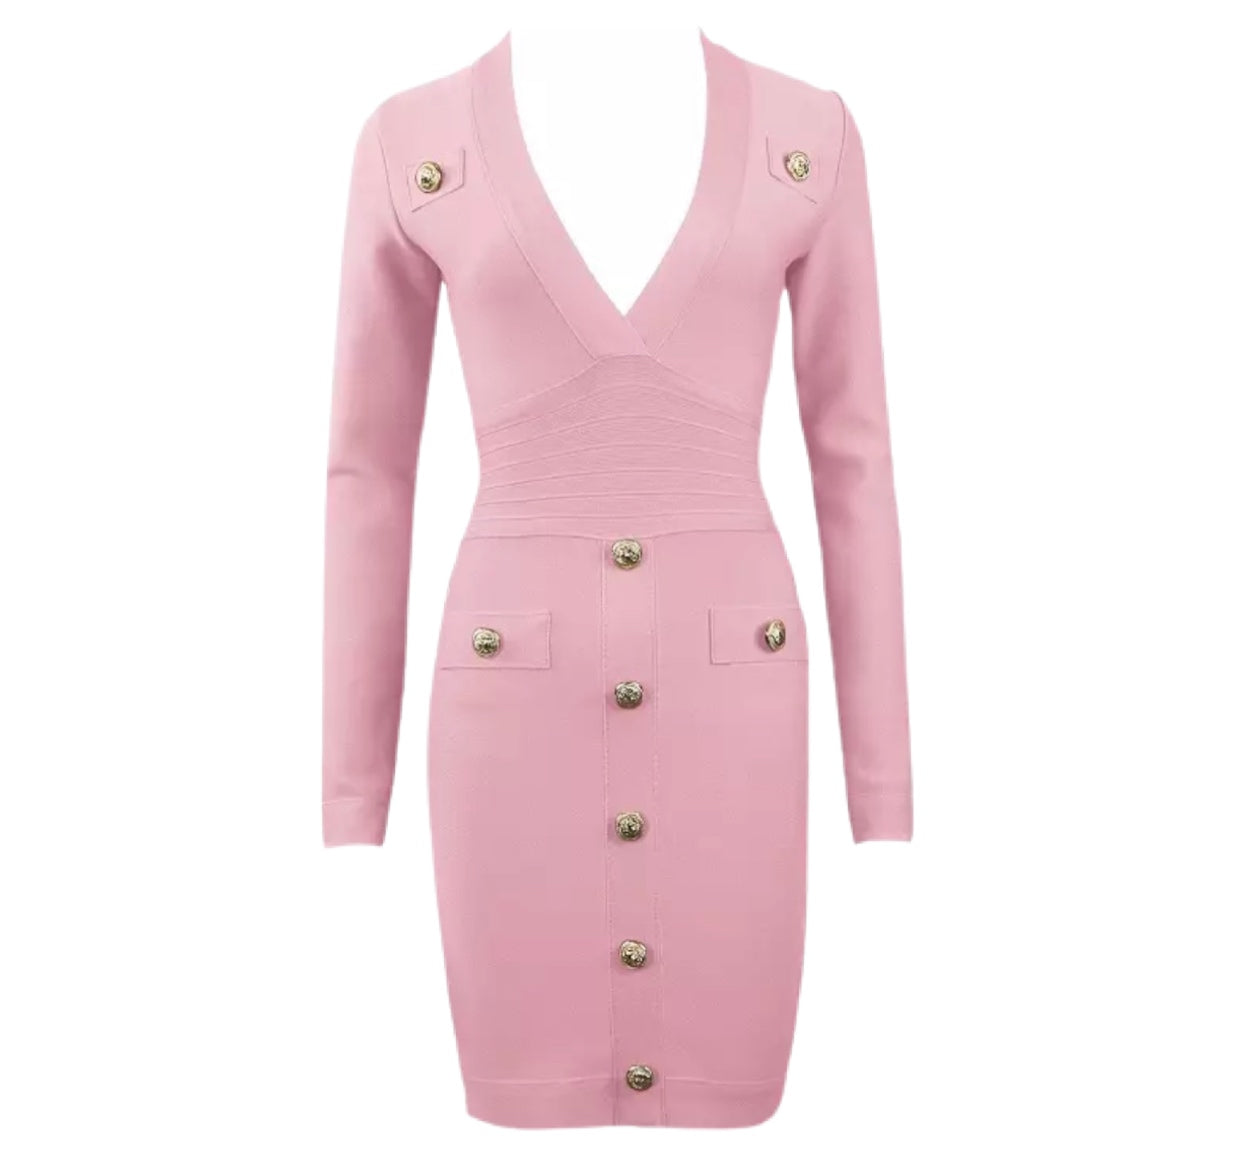 When In Rome Pink Bandage Dress